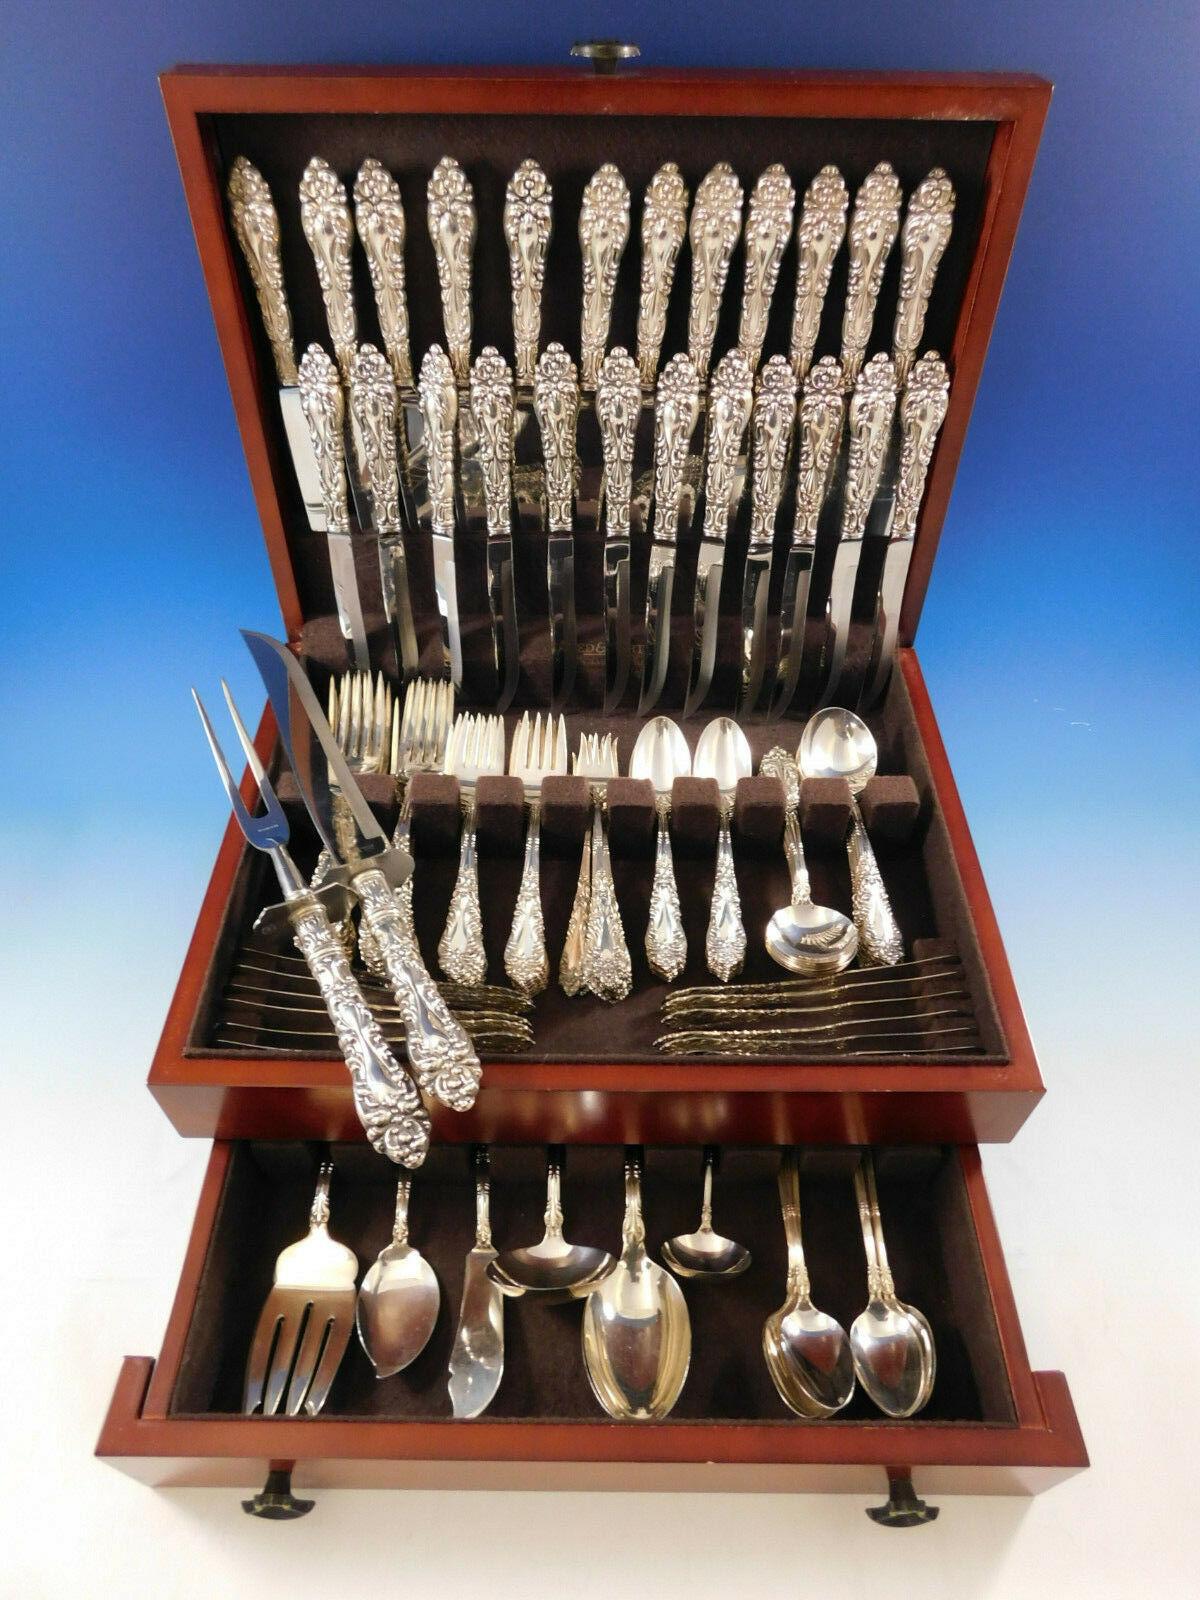 Monumental dinner size Athene AKA Crescendo by Amston sterling silver flatware set - 118 Pieces. This set includes:

12 dinner size knives, 9 3/4